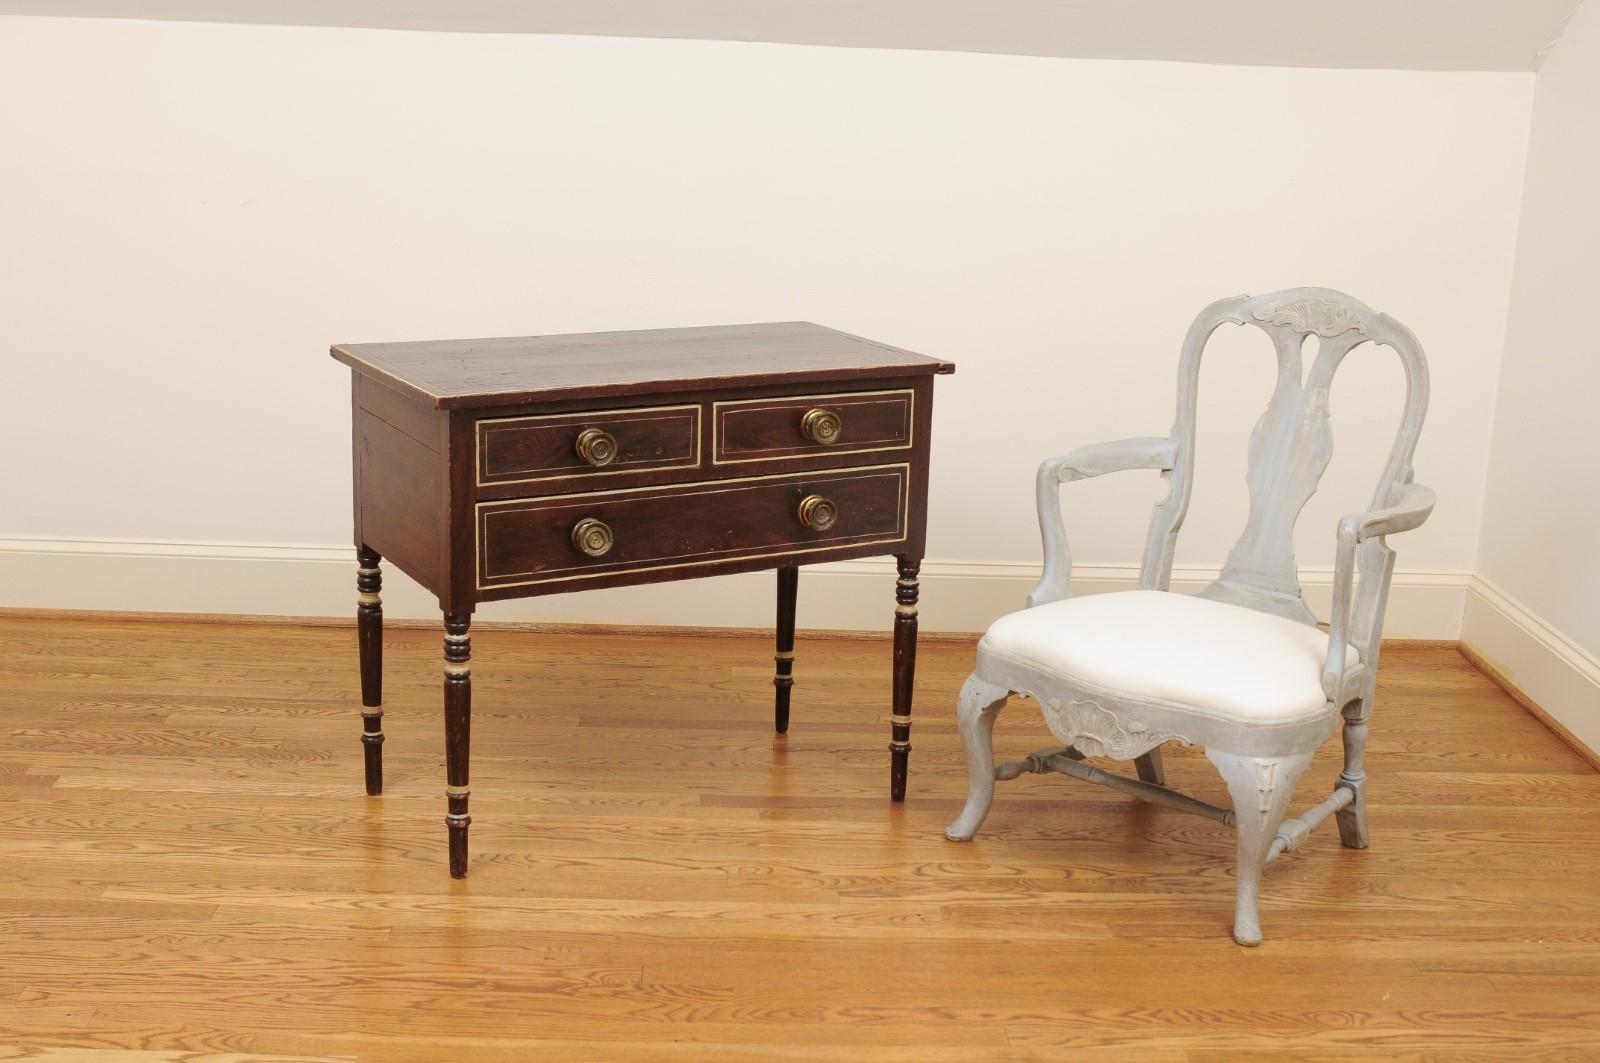 A French three-drawer commode from the 19th century, with cylindrical legs. Created in France during the 19th century, this wooden commode features a rectangular top sitting above three drawers (two small ones over a larger one), each fitted with